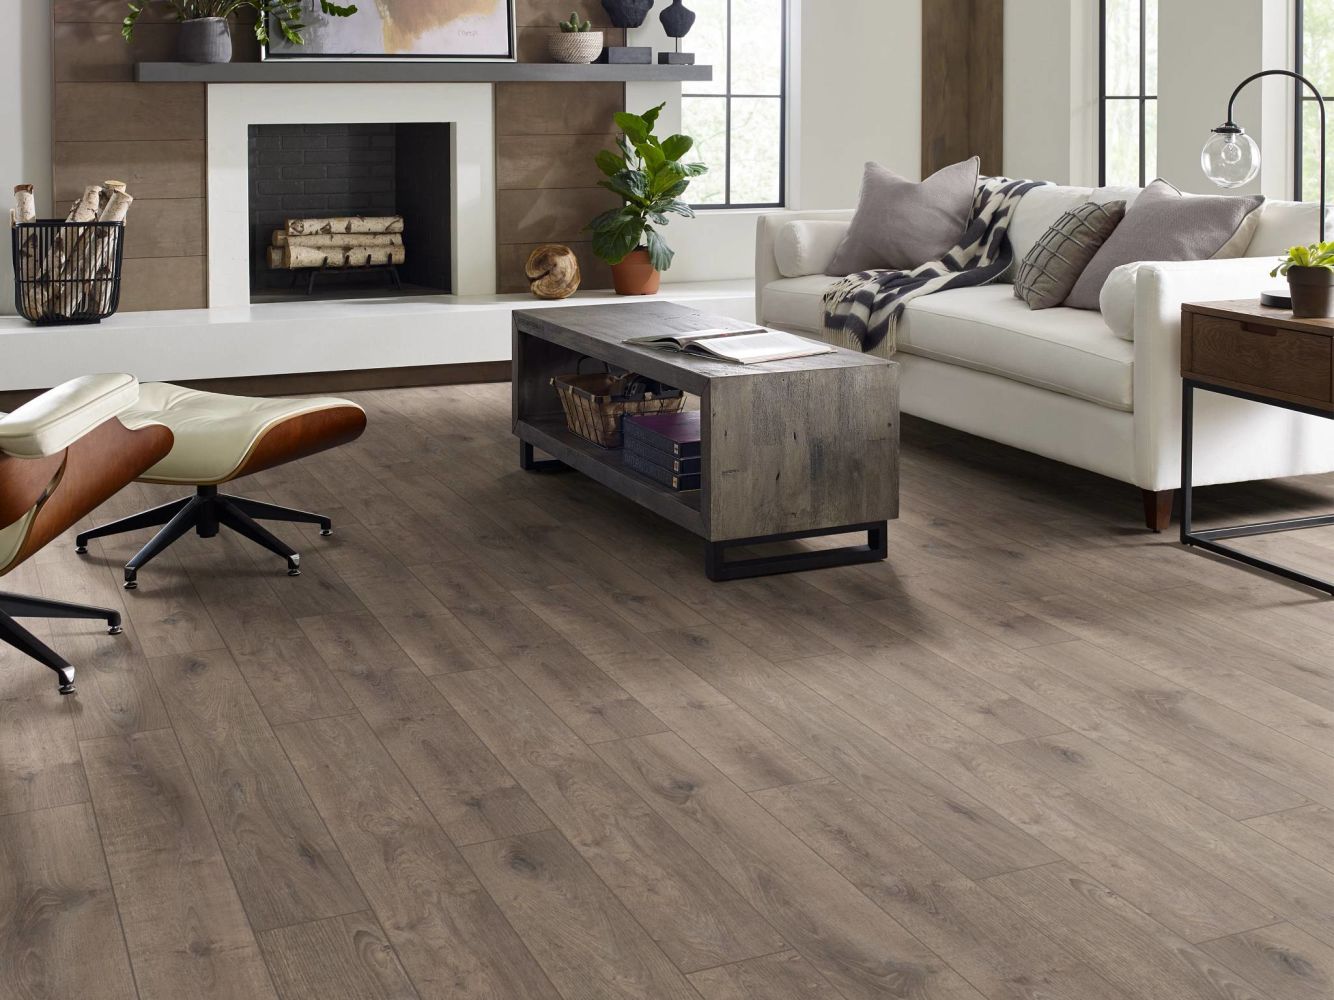 Shaw Floors Pulte Home Hard Surfaces Pebble Chase Smokehouse Grey 05054_PW216